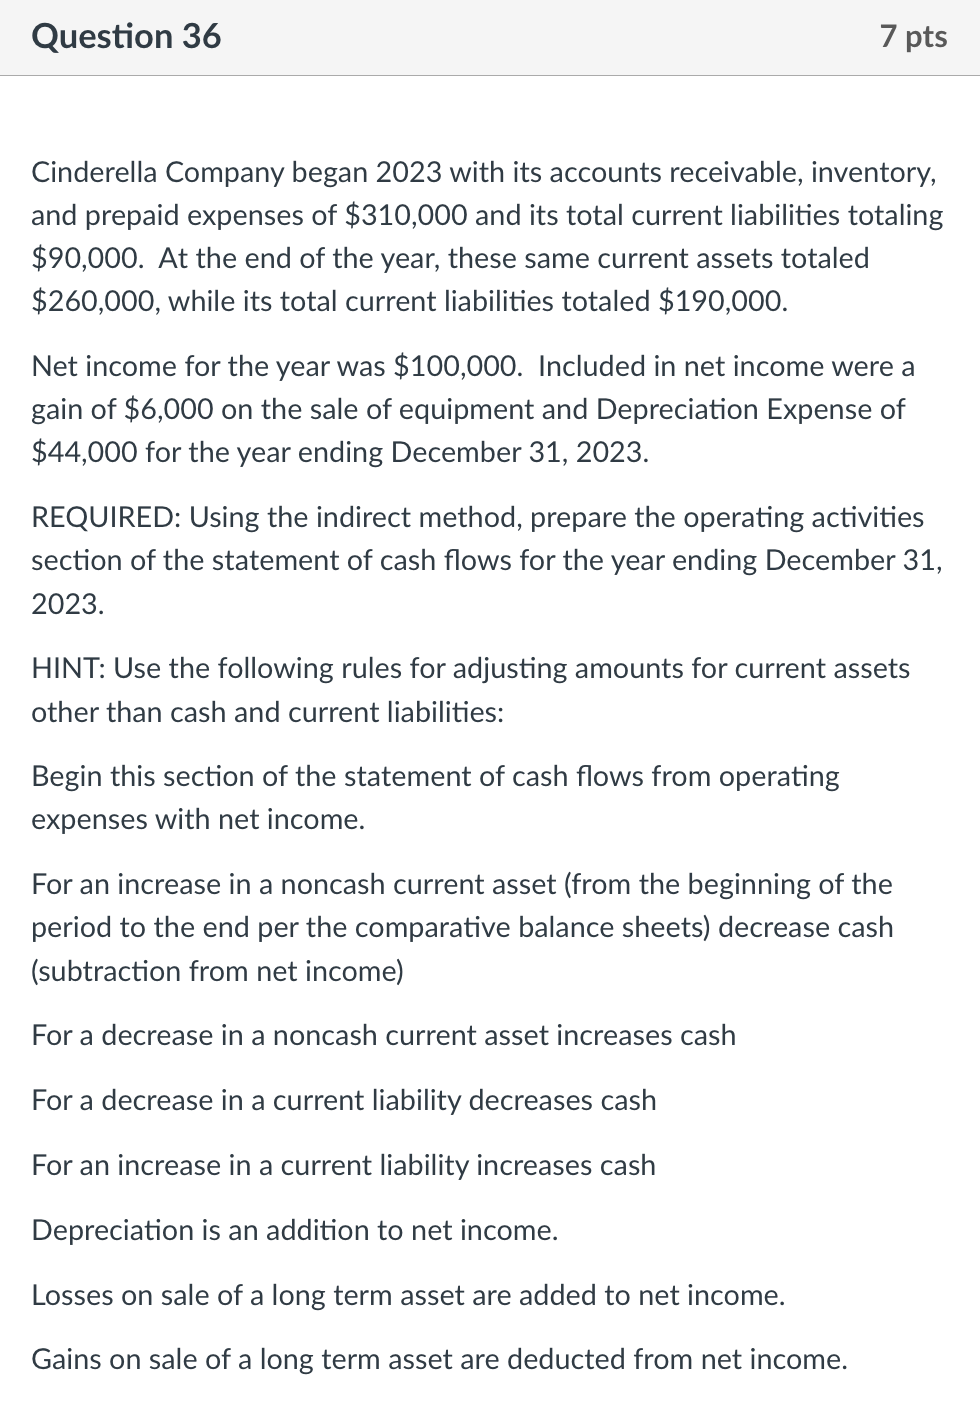 Question 36
7 pts
Cinderella Company began 2023 with its accounts receivable, inventory,
and prepaid expenses of $310,000 and its total current liabilities totaling
$90,000. At the end of the year, these same current assets totaled
$260,000, while its total current liabilities totaled $190,000.
Net income for the year was $100,000. Included in net income were a
gain of $6,000 on the sale of equipment and Depreciation Expense of
$44,000 for the year ending December 31, 2023.
REQUIRED: Using the indirect method, prepare the operating activities
section of the statement of cash flows for the year ending December 31,
2023.
HINT: Use the following rules for adjusting amounts for current assets
other than cash and current liabilities:
Begin this section of the statement of cash flows from operating
expenses with net income.
For an increase in a noncash current asset (from the beginning of the
period to the end per the comparative balance sheets) decrease cash
(subtraction from net income)
For a decrease in a noncash current asset increases cash
For a decrease in a current liability decreases cash
For an increase in a current liability increases cash
Depreciation is an addition to net income.
Losses on sale of a long term asset are added to net income.
Gains on sale of a long term asset are deducted from net income.